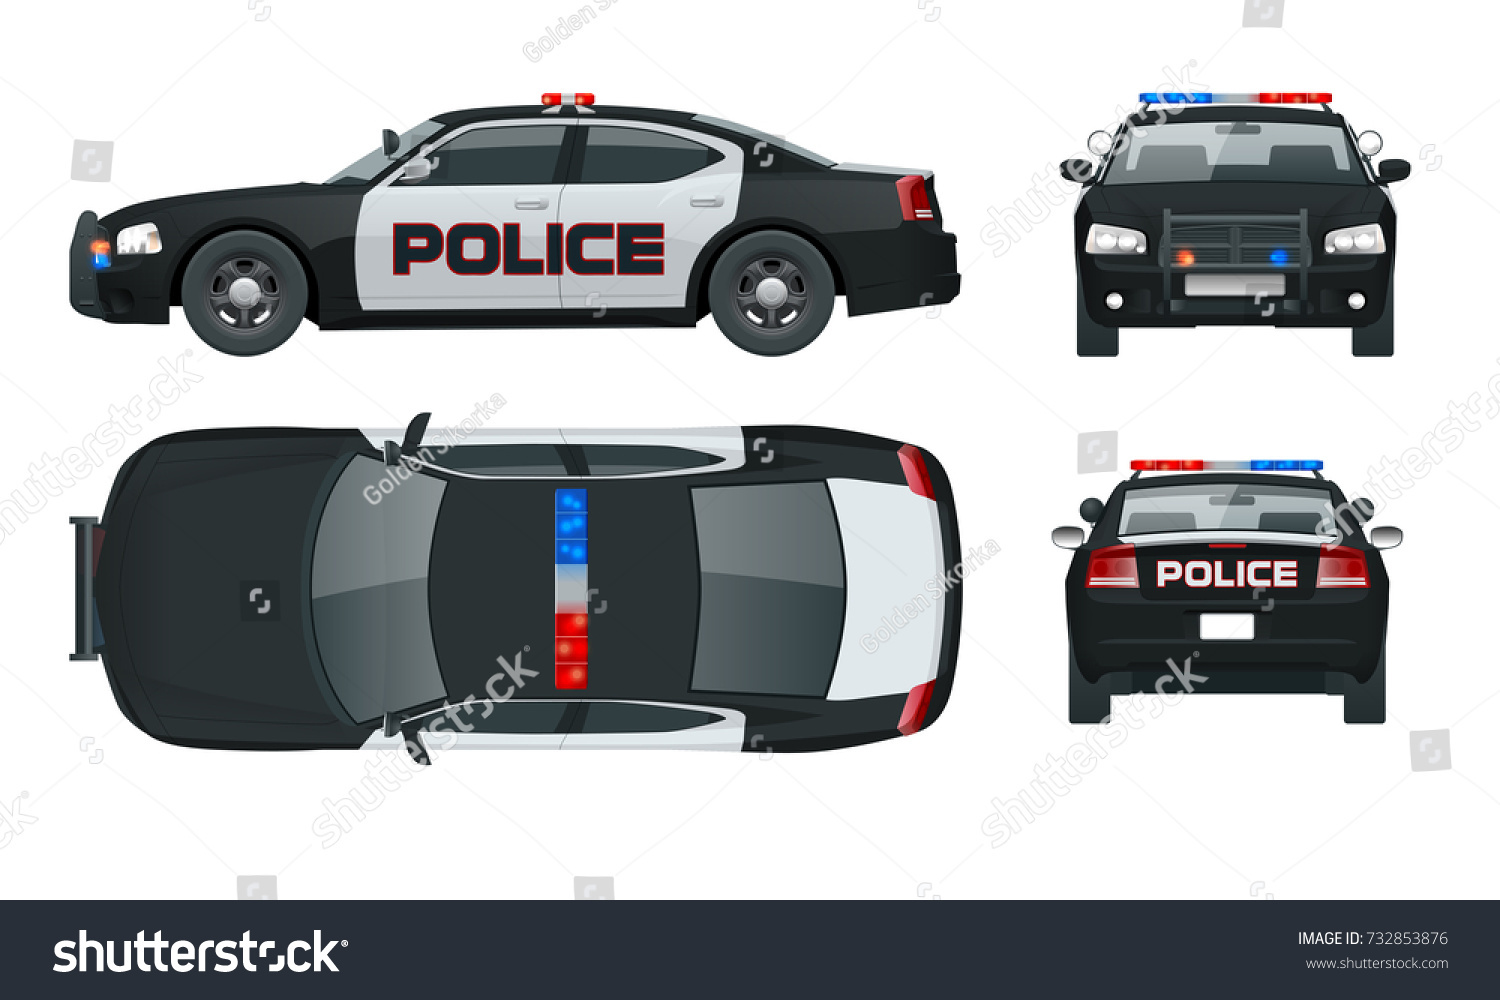 SVG of Vector Police car with rooftop flashing lights, a siren and emblems. Template isolated illustration. View front, rear, side, top. Change the color in one click. svg